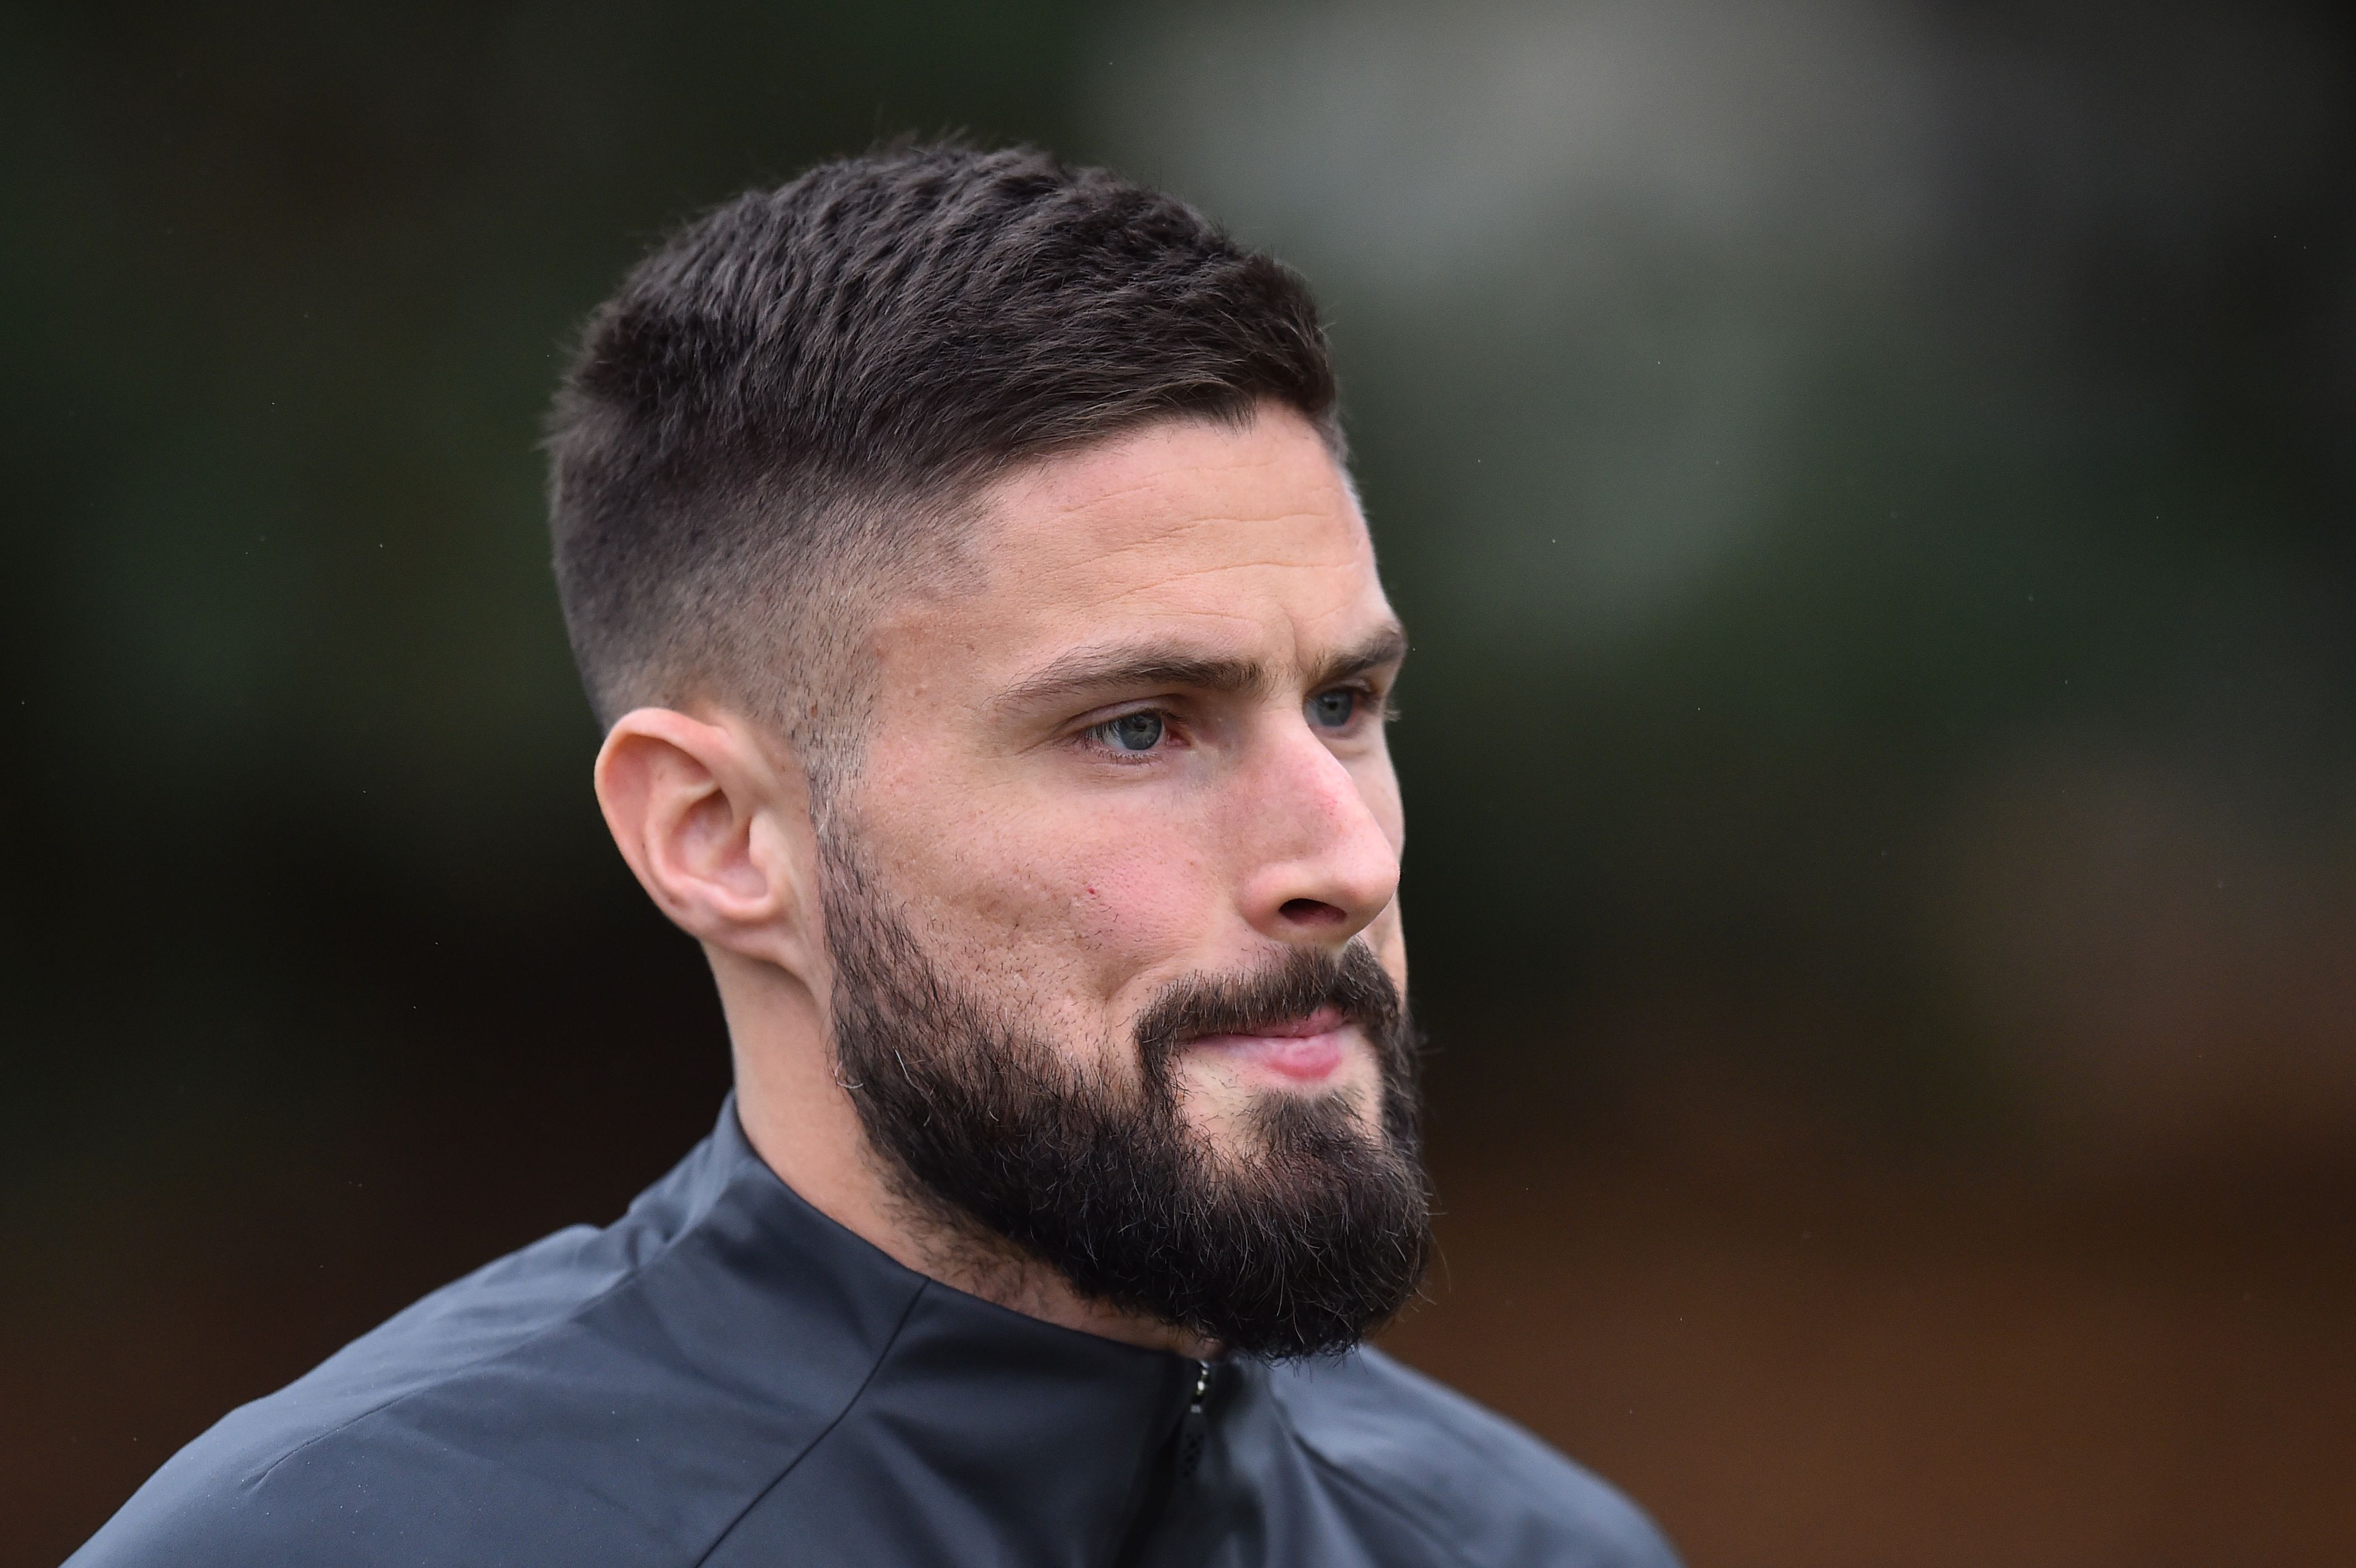 Chelsea's French striker Olivier Giroud attends a training session at Chelsea's Cobham training facility in Stoke D'Abernon, southwest of London on November 26, 2019, on the eve of their UEFA Champions League Group H football match against Valencia. (Photo by Glyn KIRK / AFP) (Photo by GLYN KIRK/AFP via Getty Images)